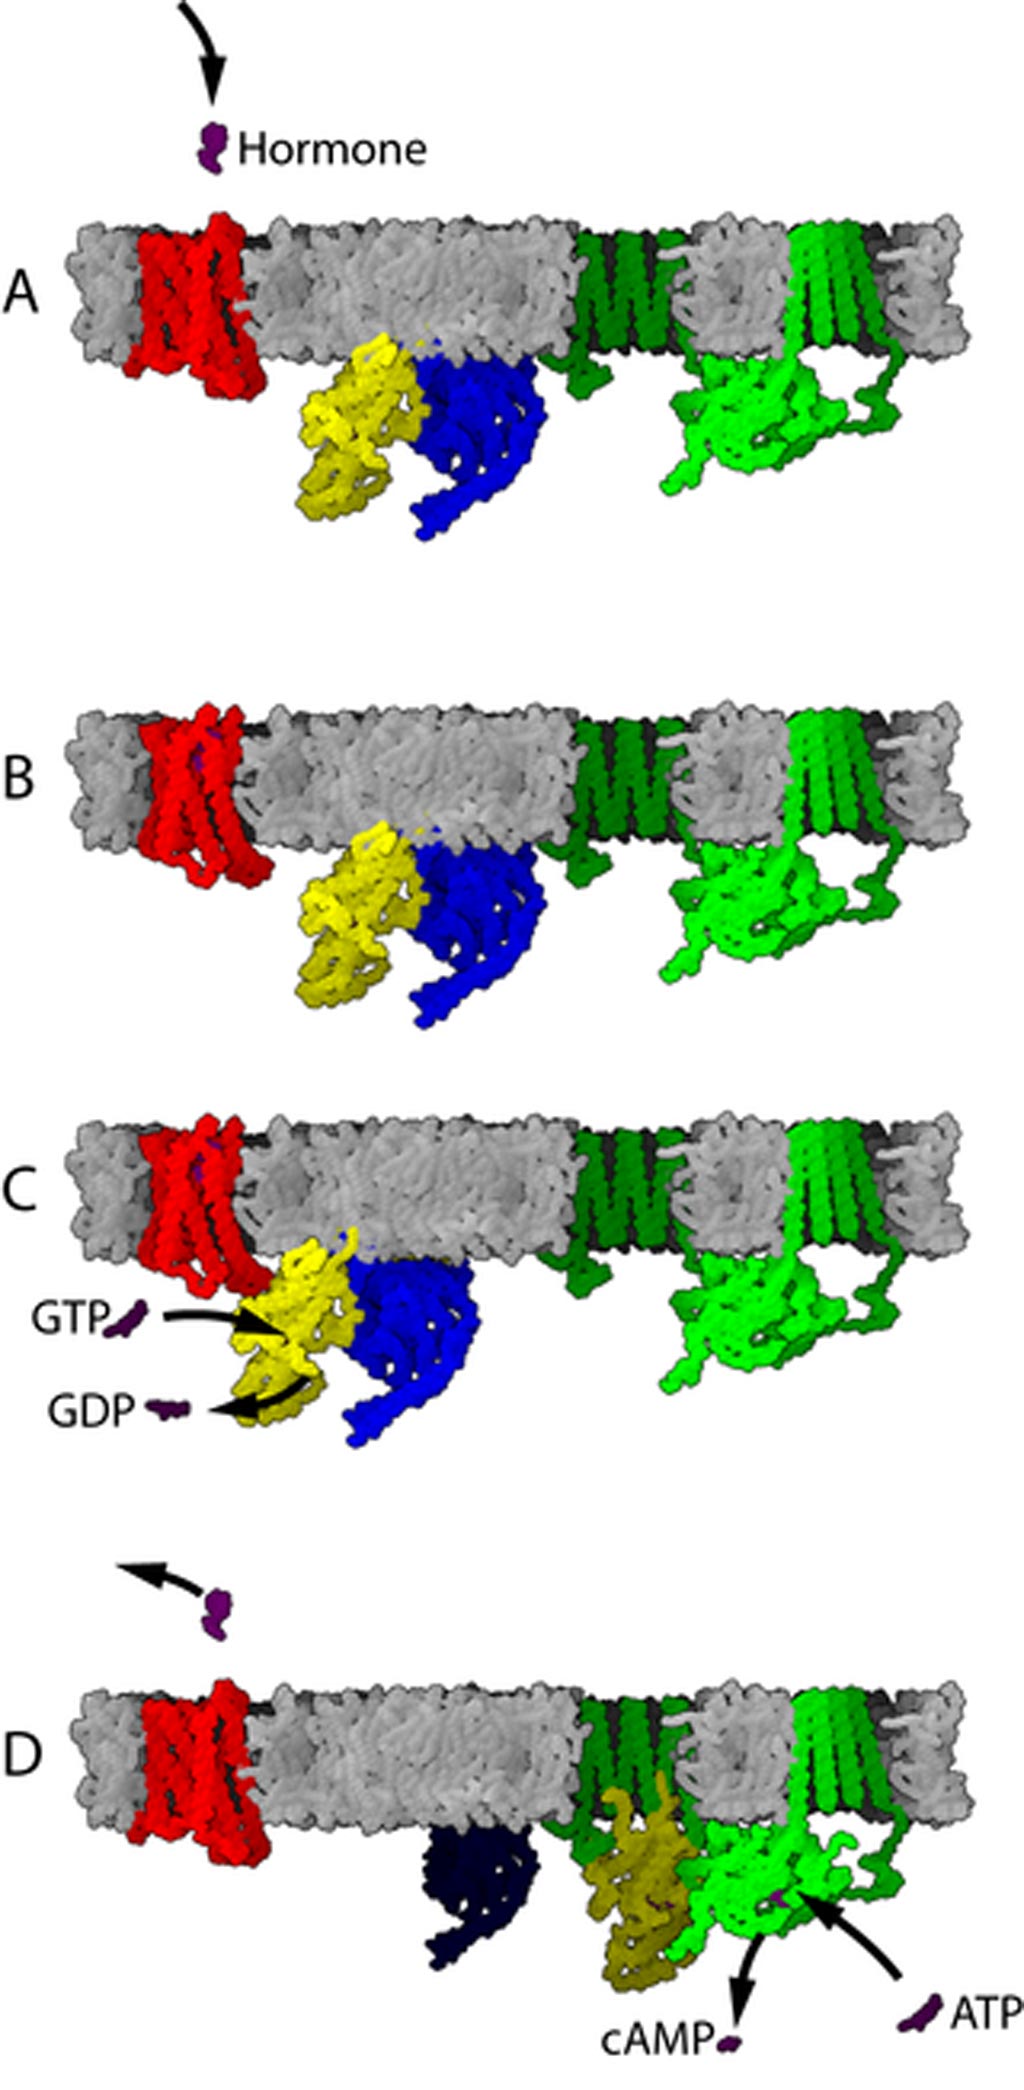 Image: G-protein-coupled receptor mechanism (Photo courtesy of Wikimedia Commons).